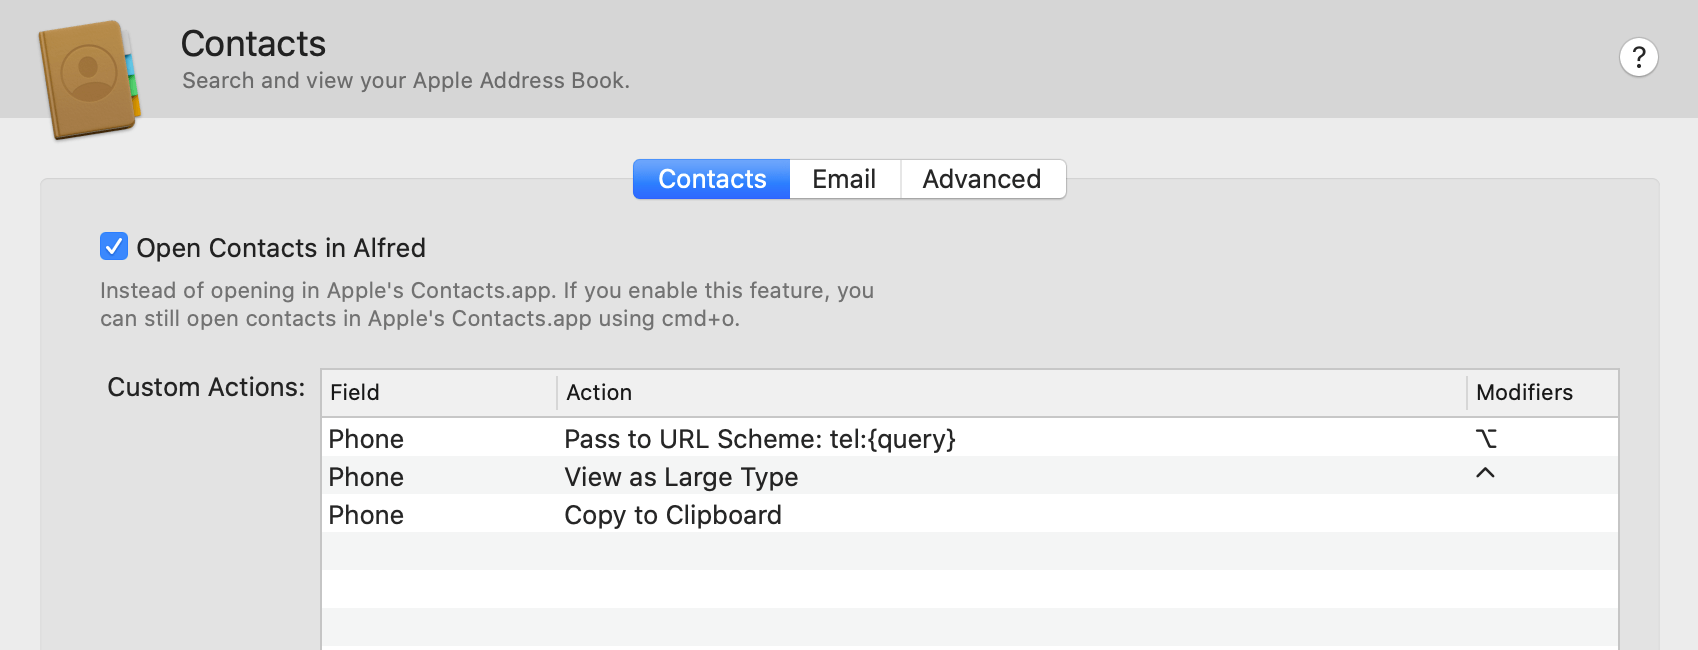 Contact Action preferences with modifiers set to perform different actions